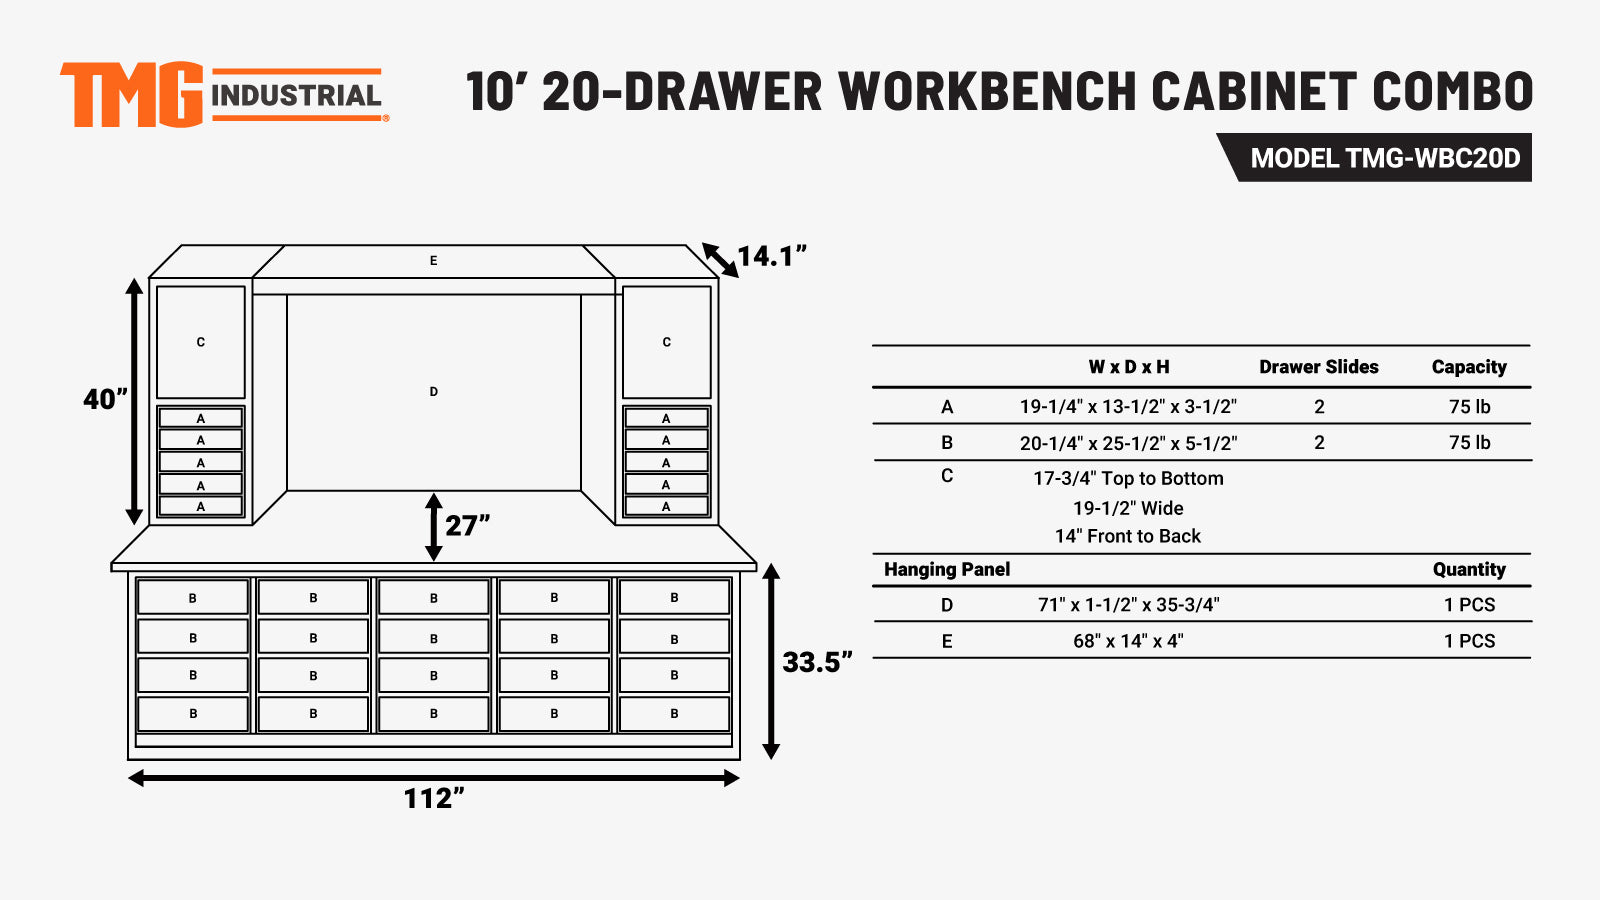 TMG-WBC20D 10' 20-Drawer Workbench Cabinet Combo with Stainless Steel Drawer Panels-specifications-image